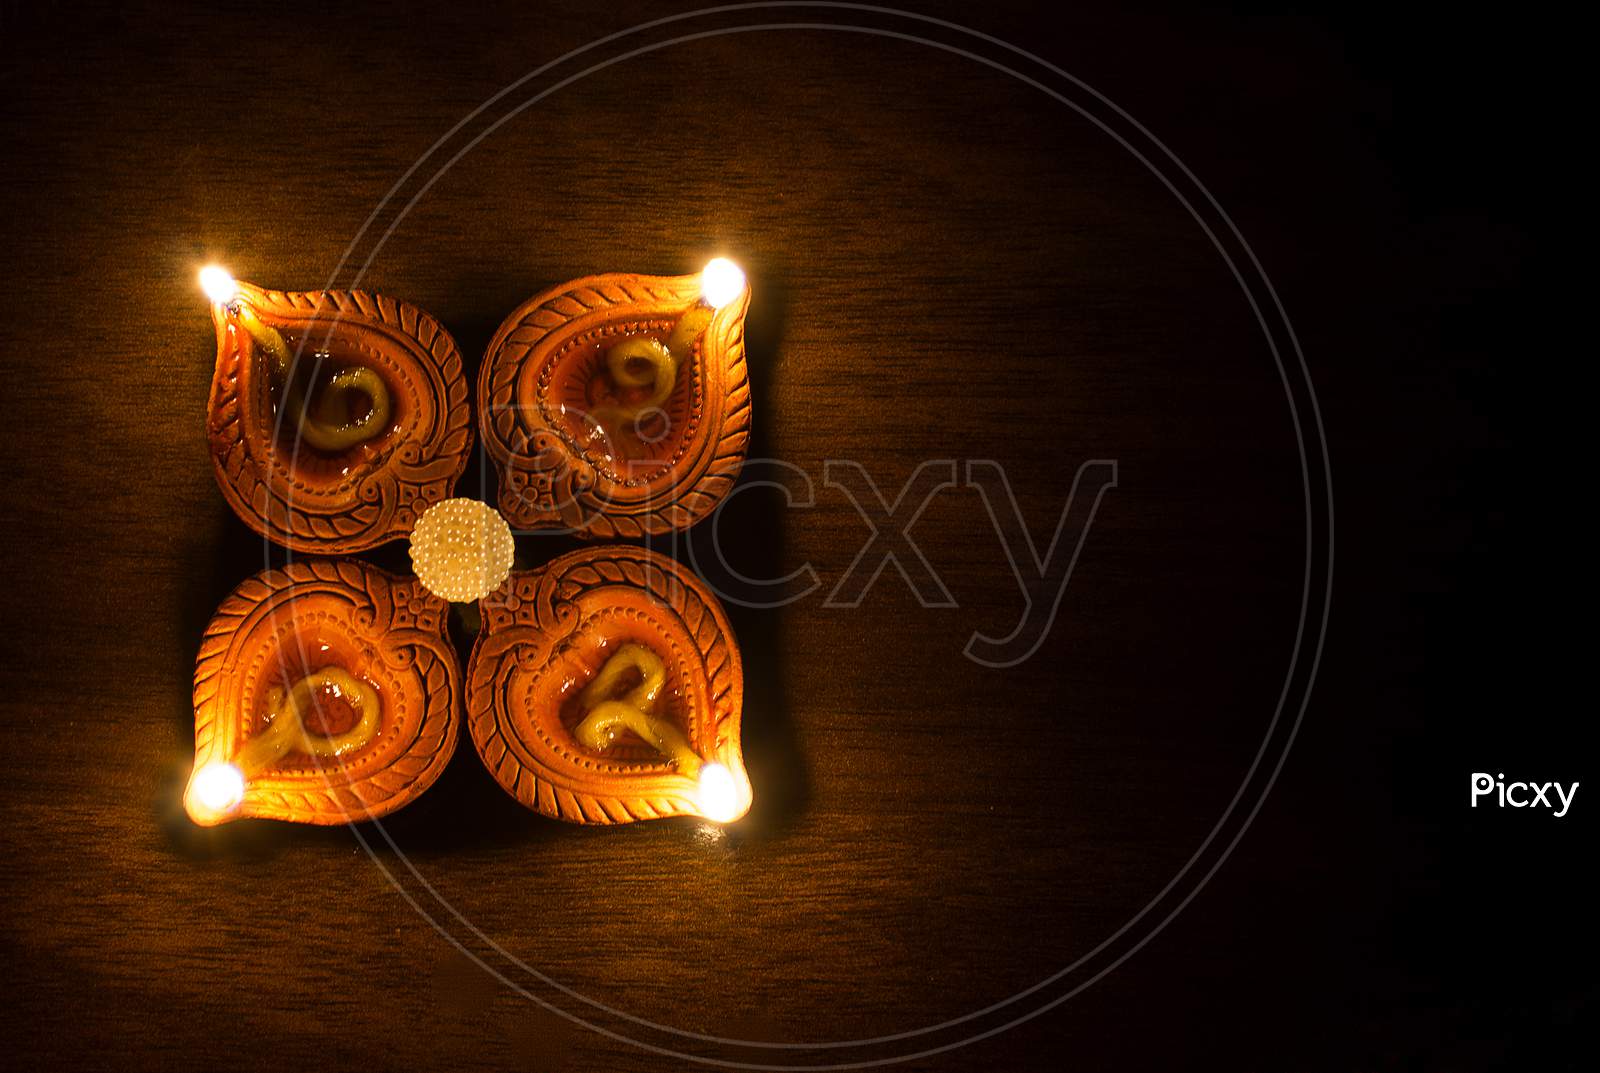 A Lightened Diya's A Concept of Happy Diwali Greetings